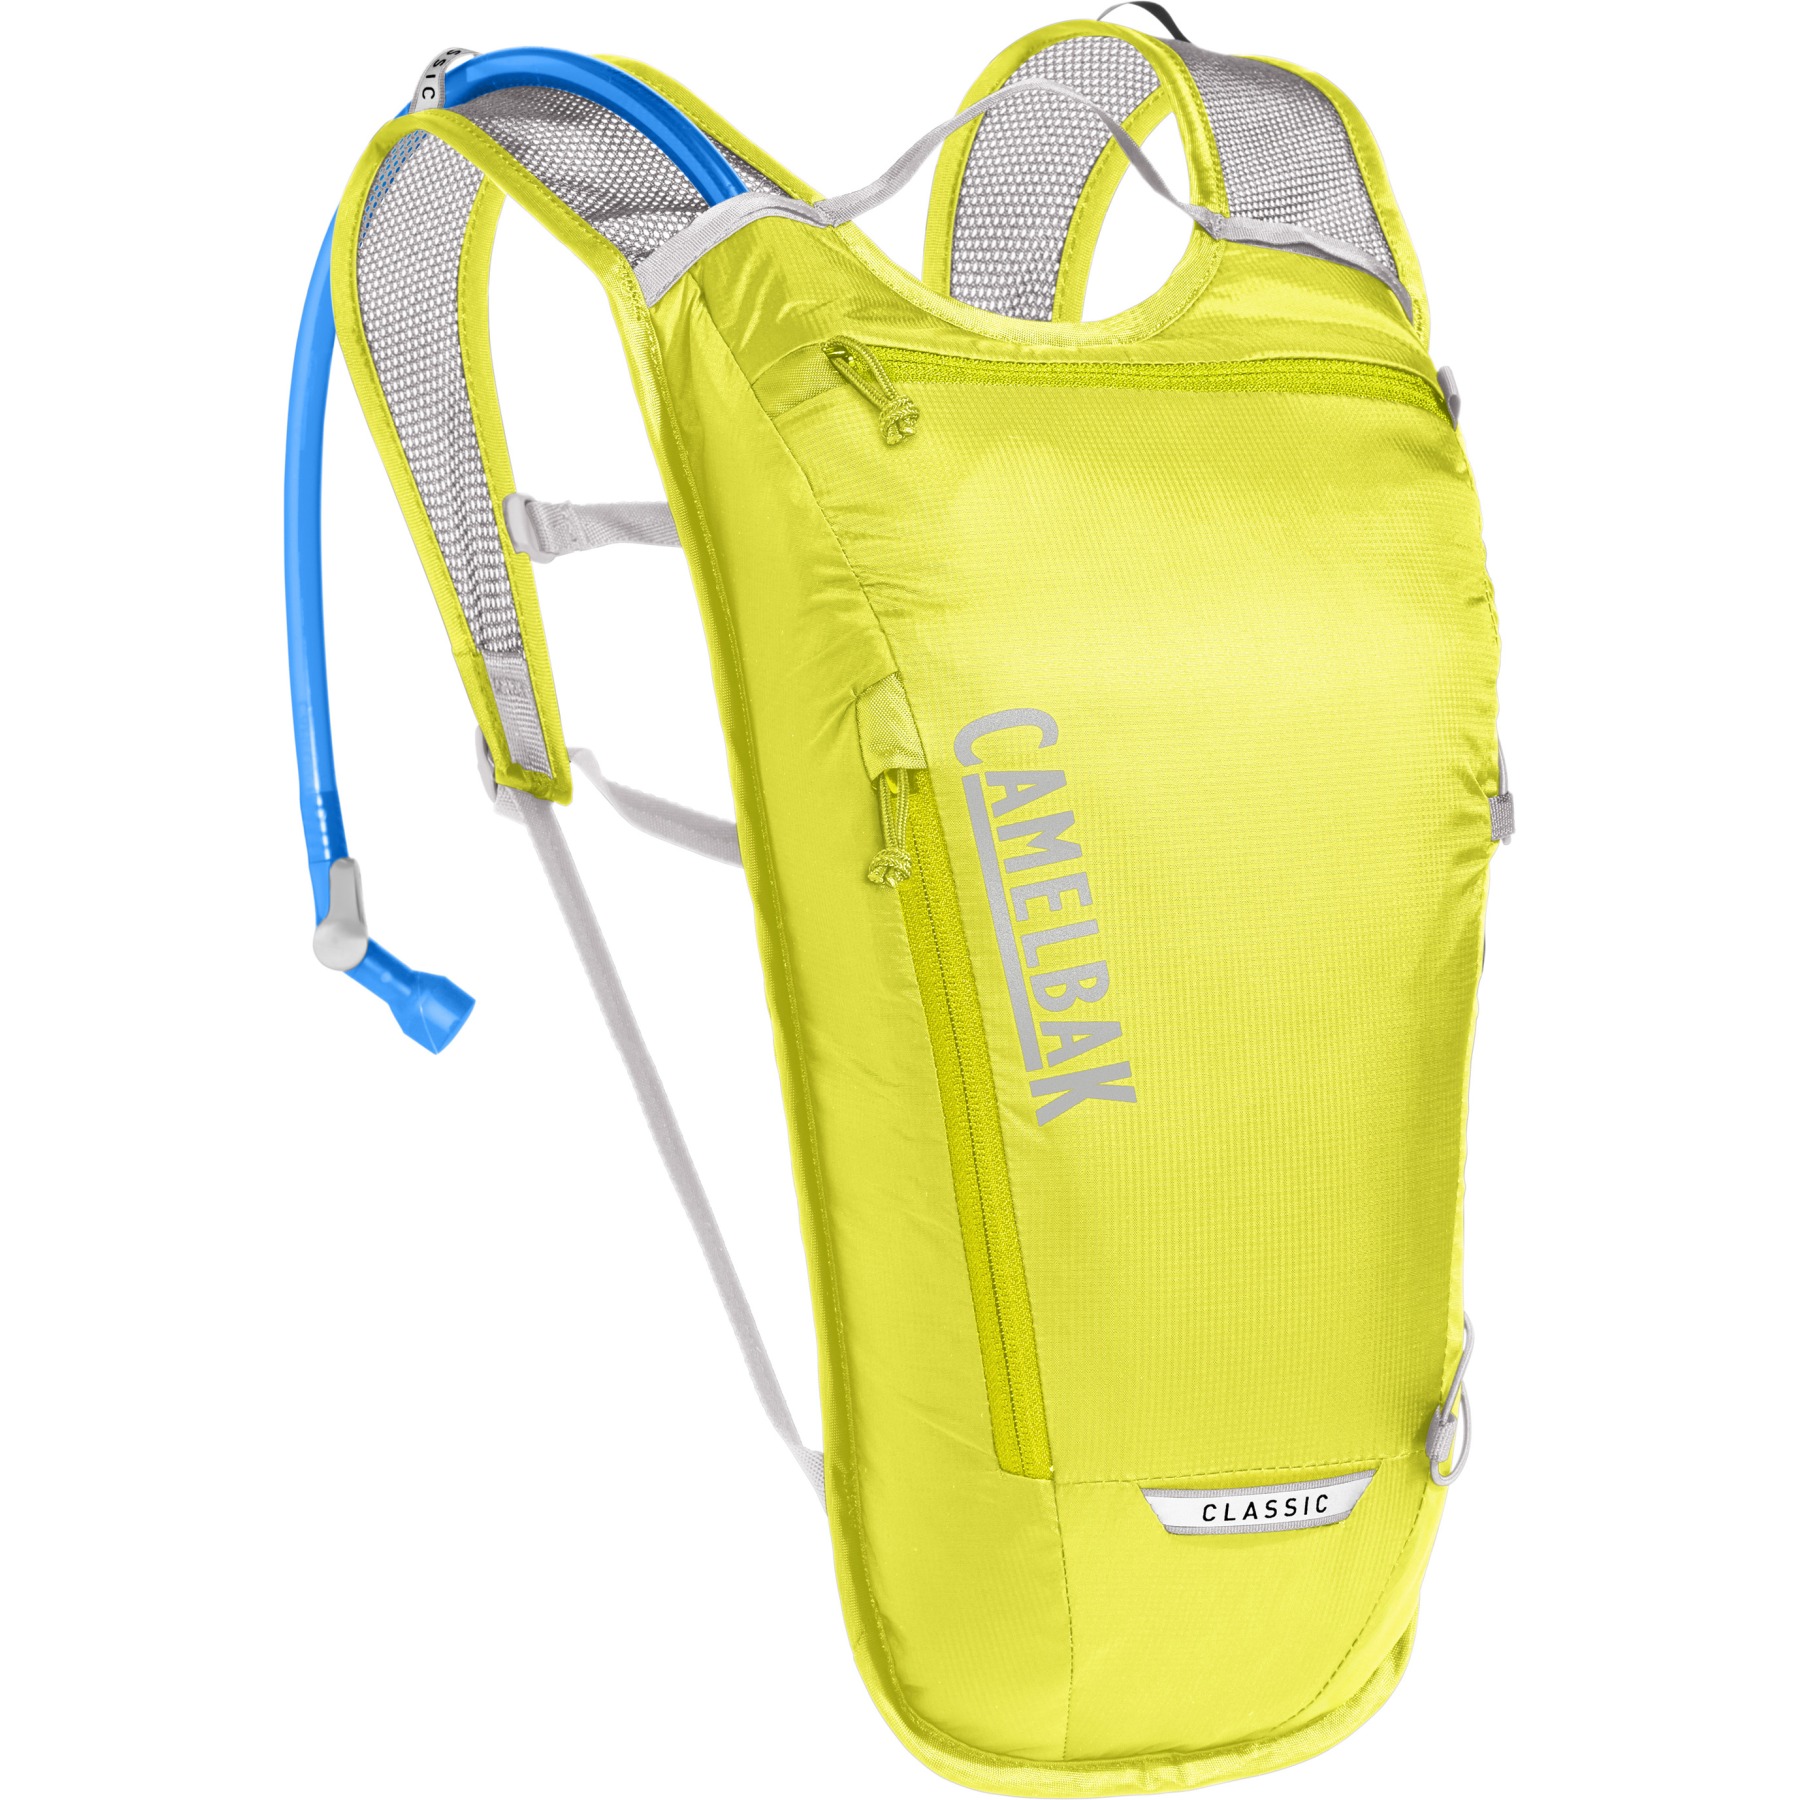 Image of CamelBak Classic Light Backpack 2L - safety yellow/silver